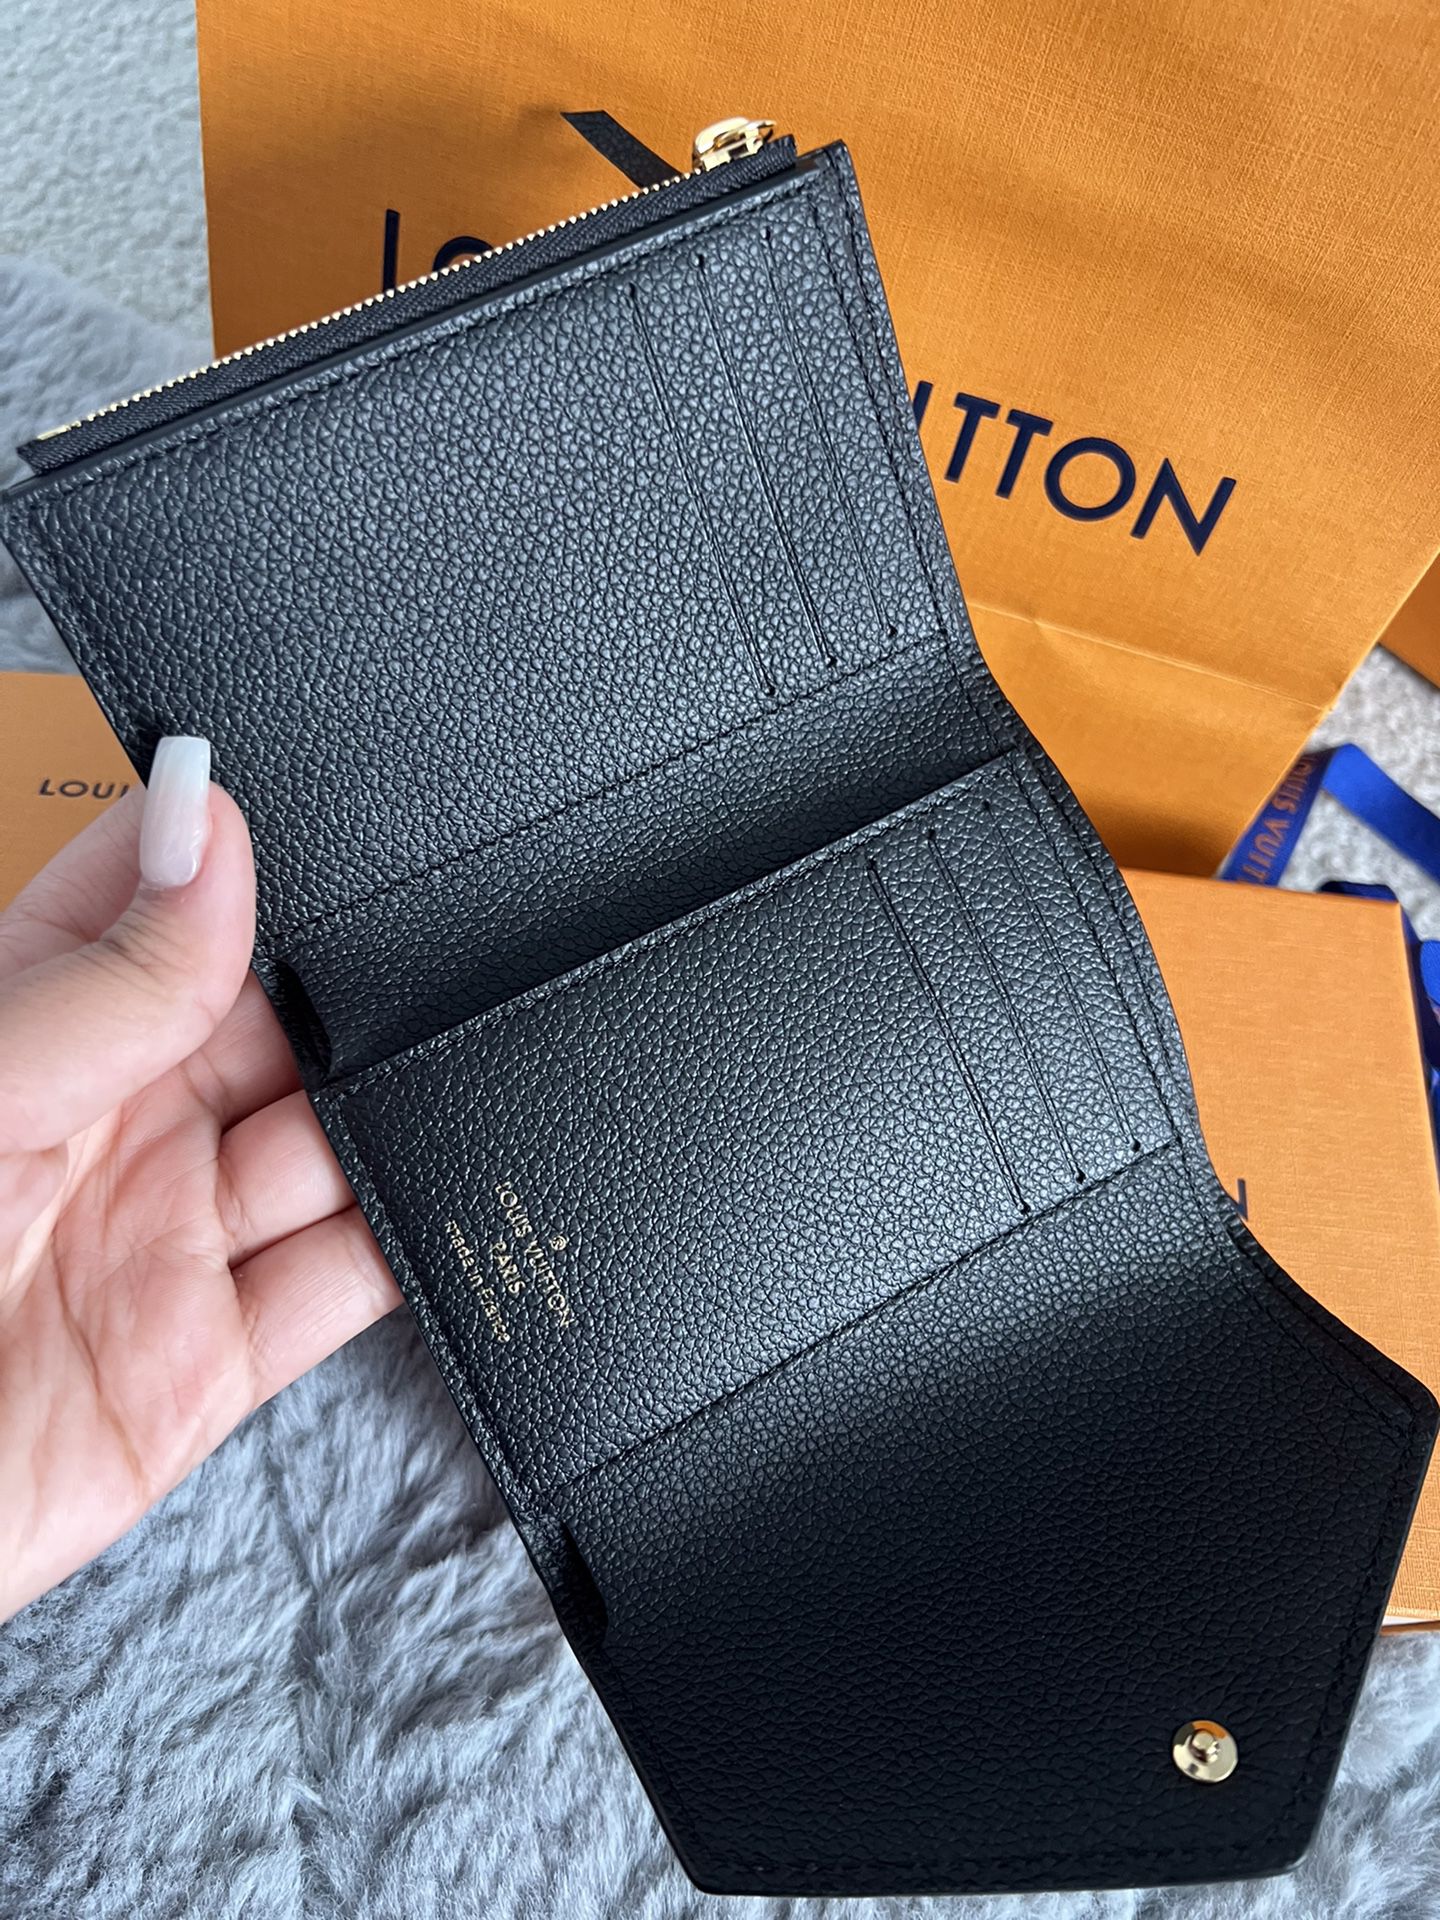 Reference] Authentic LV Victorine Wallet : r/WagoonLadies